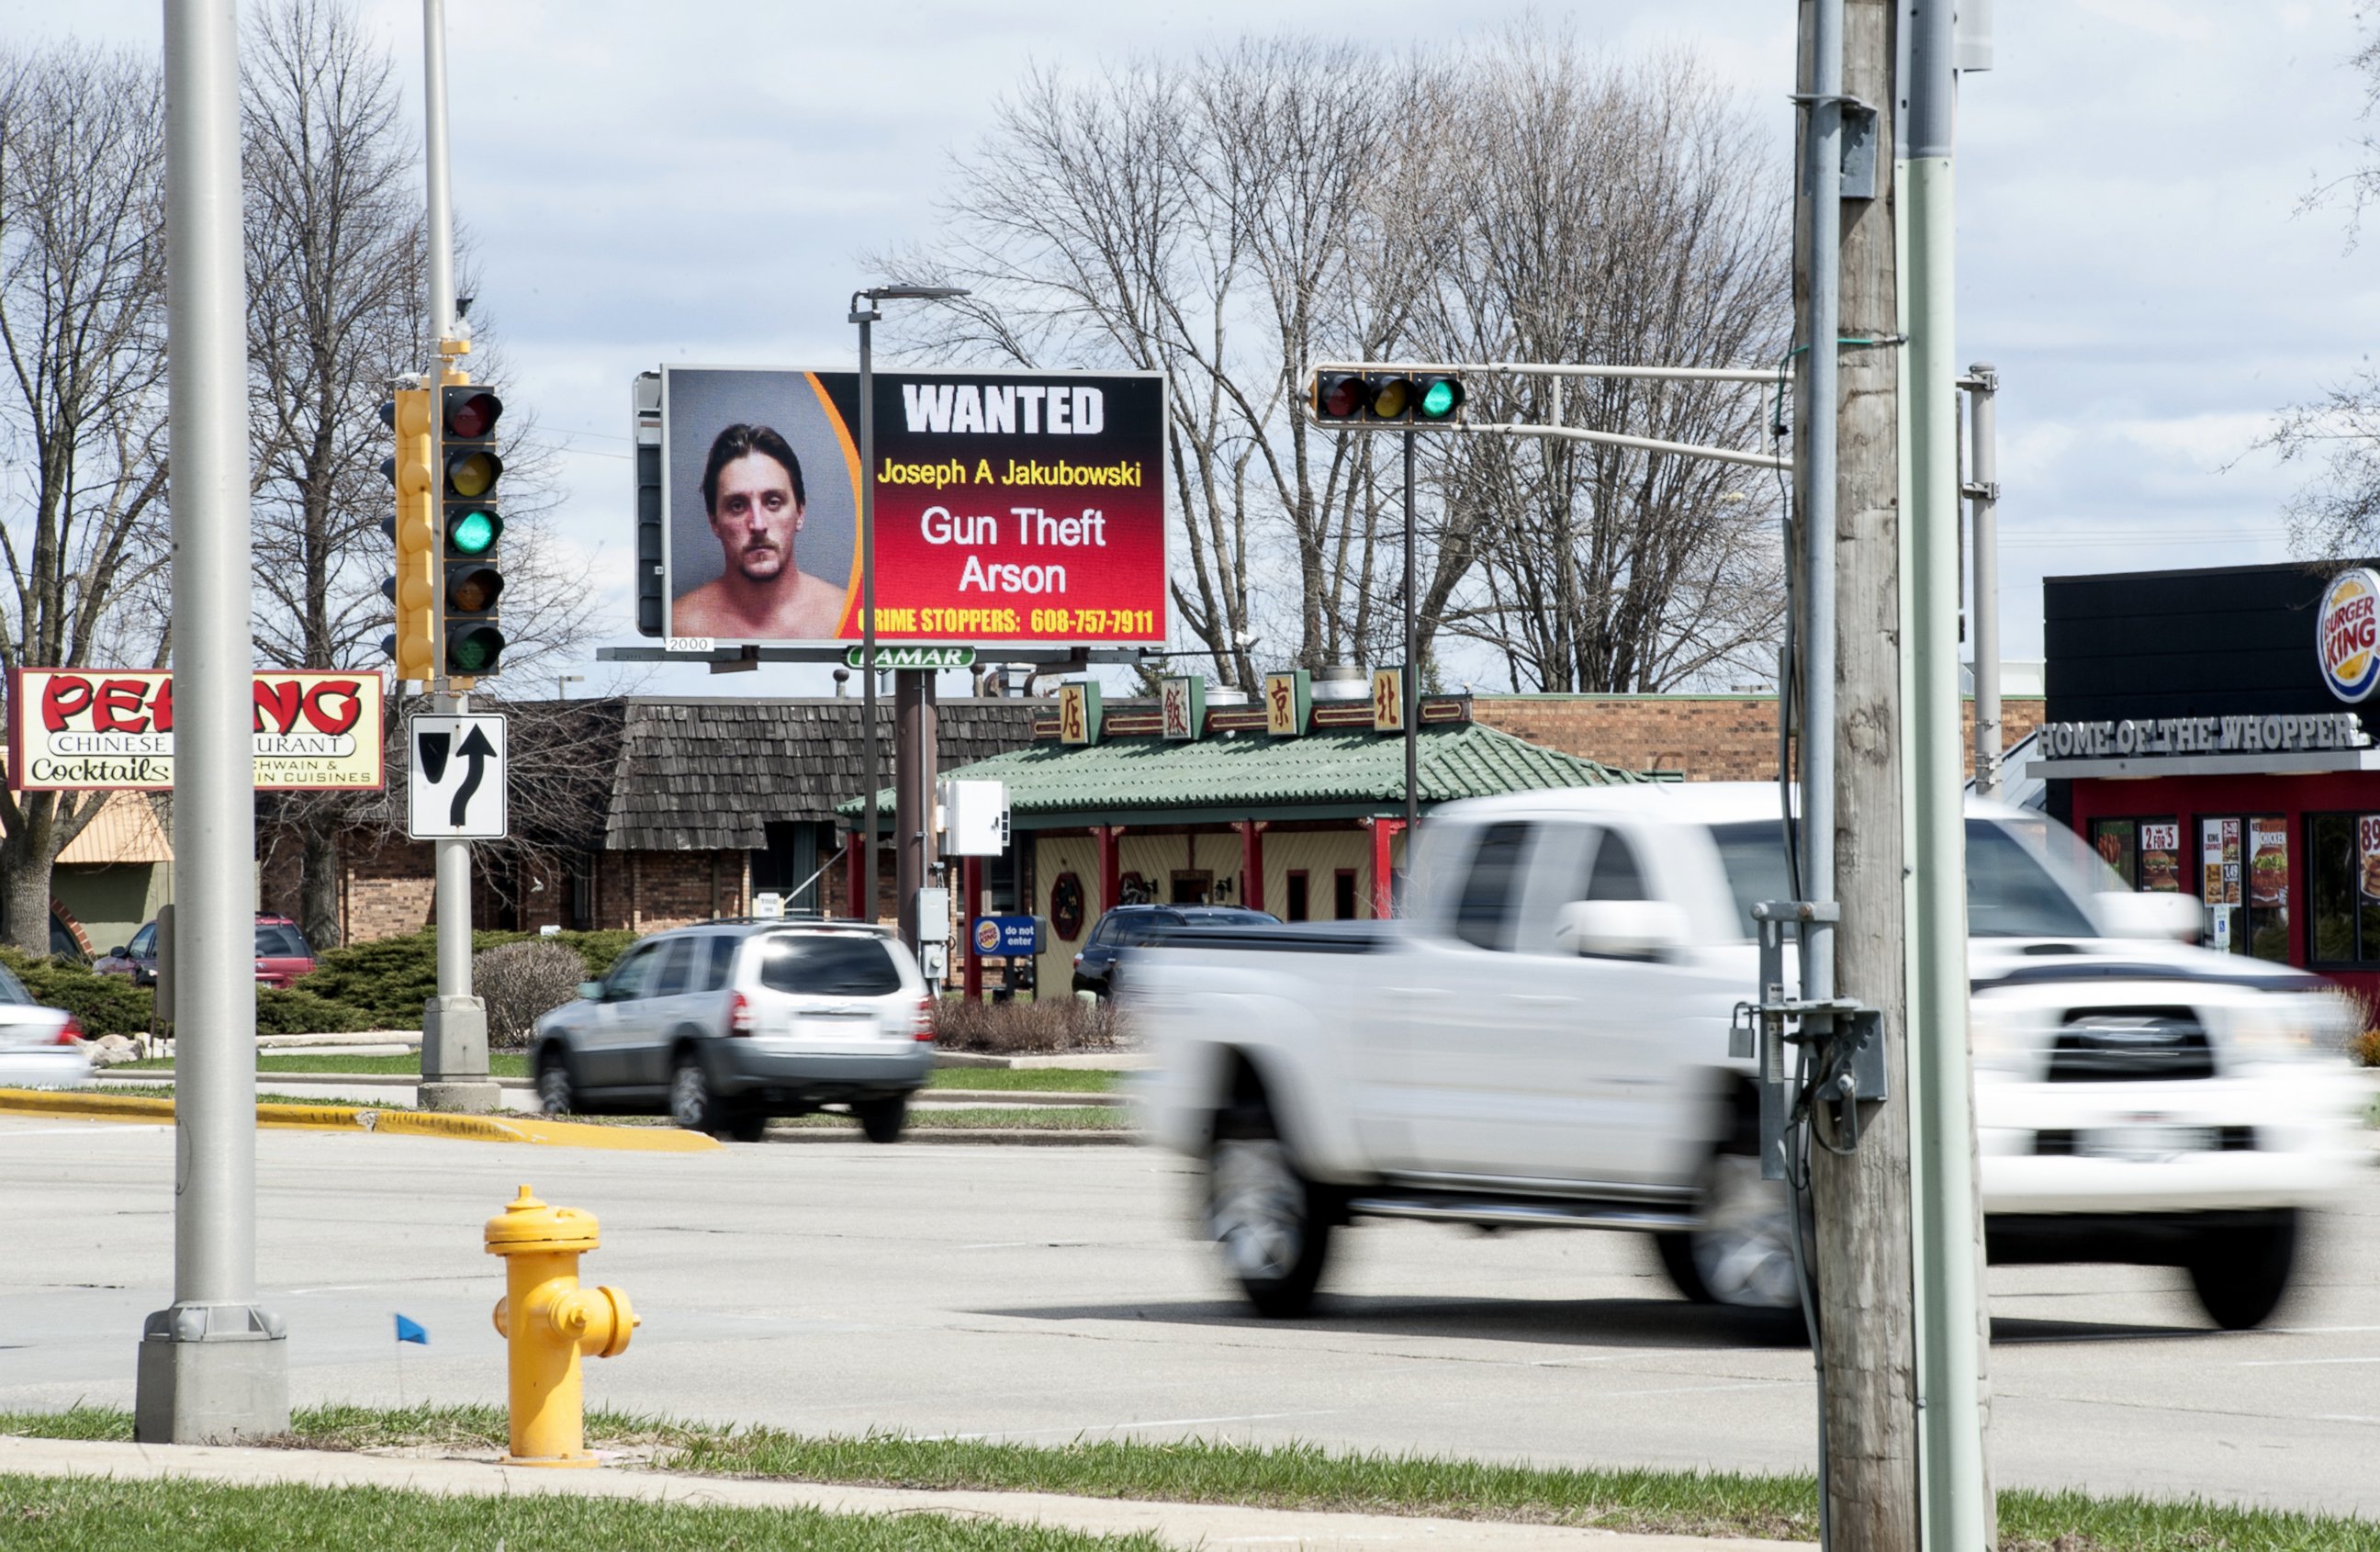 PHOTO: In this Thursday, April 6, 2017 photo, vehicles drive by an electronic billboard in Janesville, Wis., showing a wanted sign for Joseph Jakubowski.